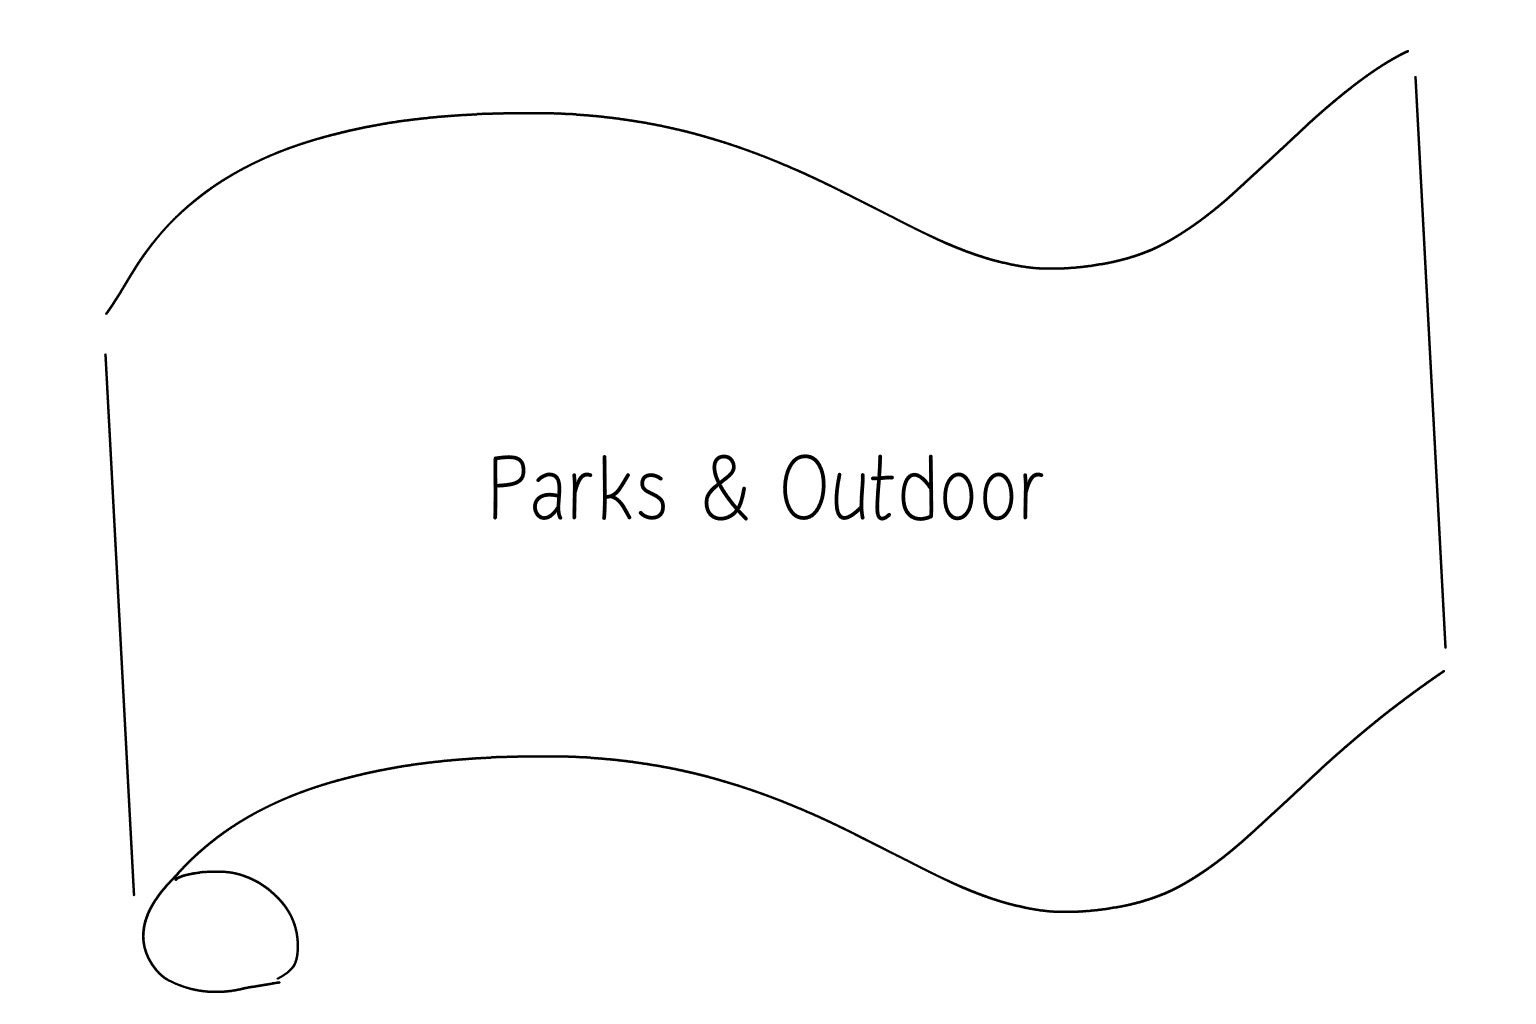 Illustration of Parks & Outdoor